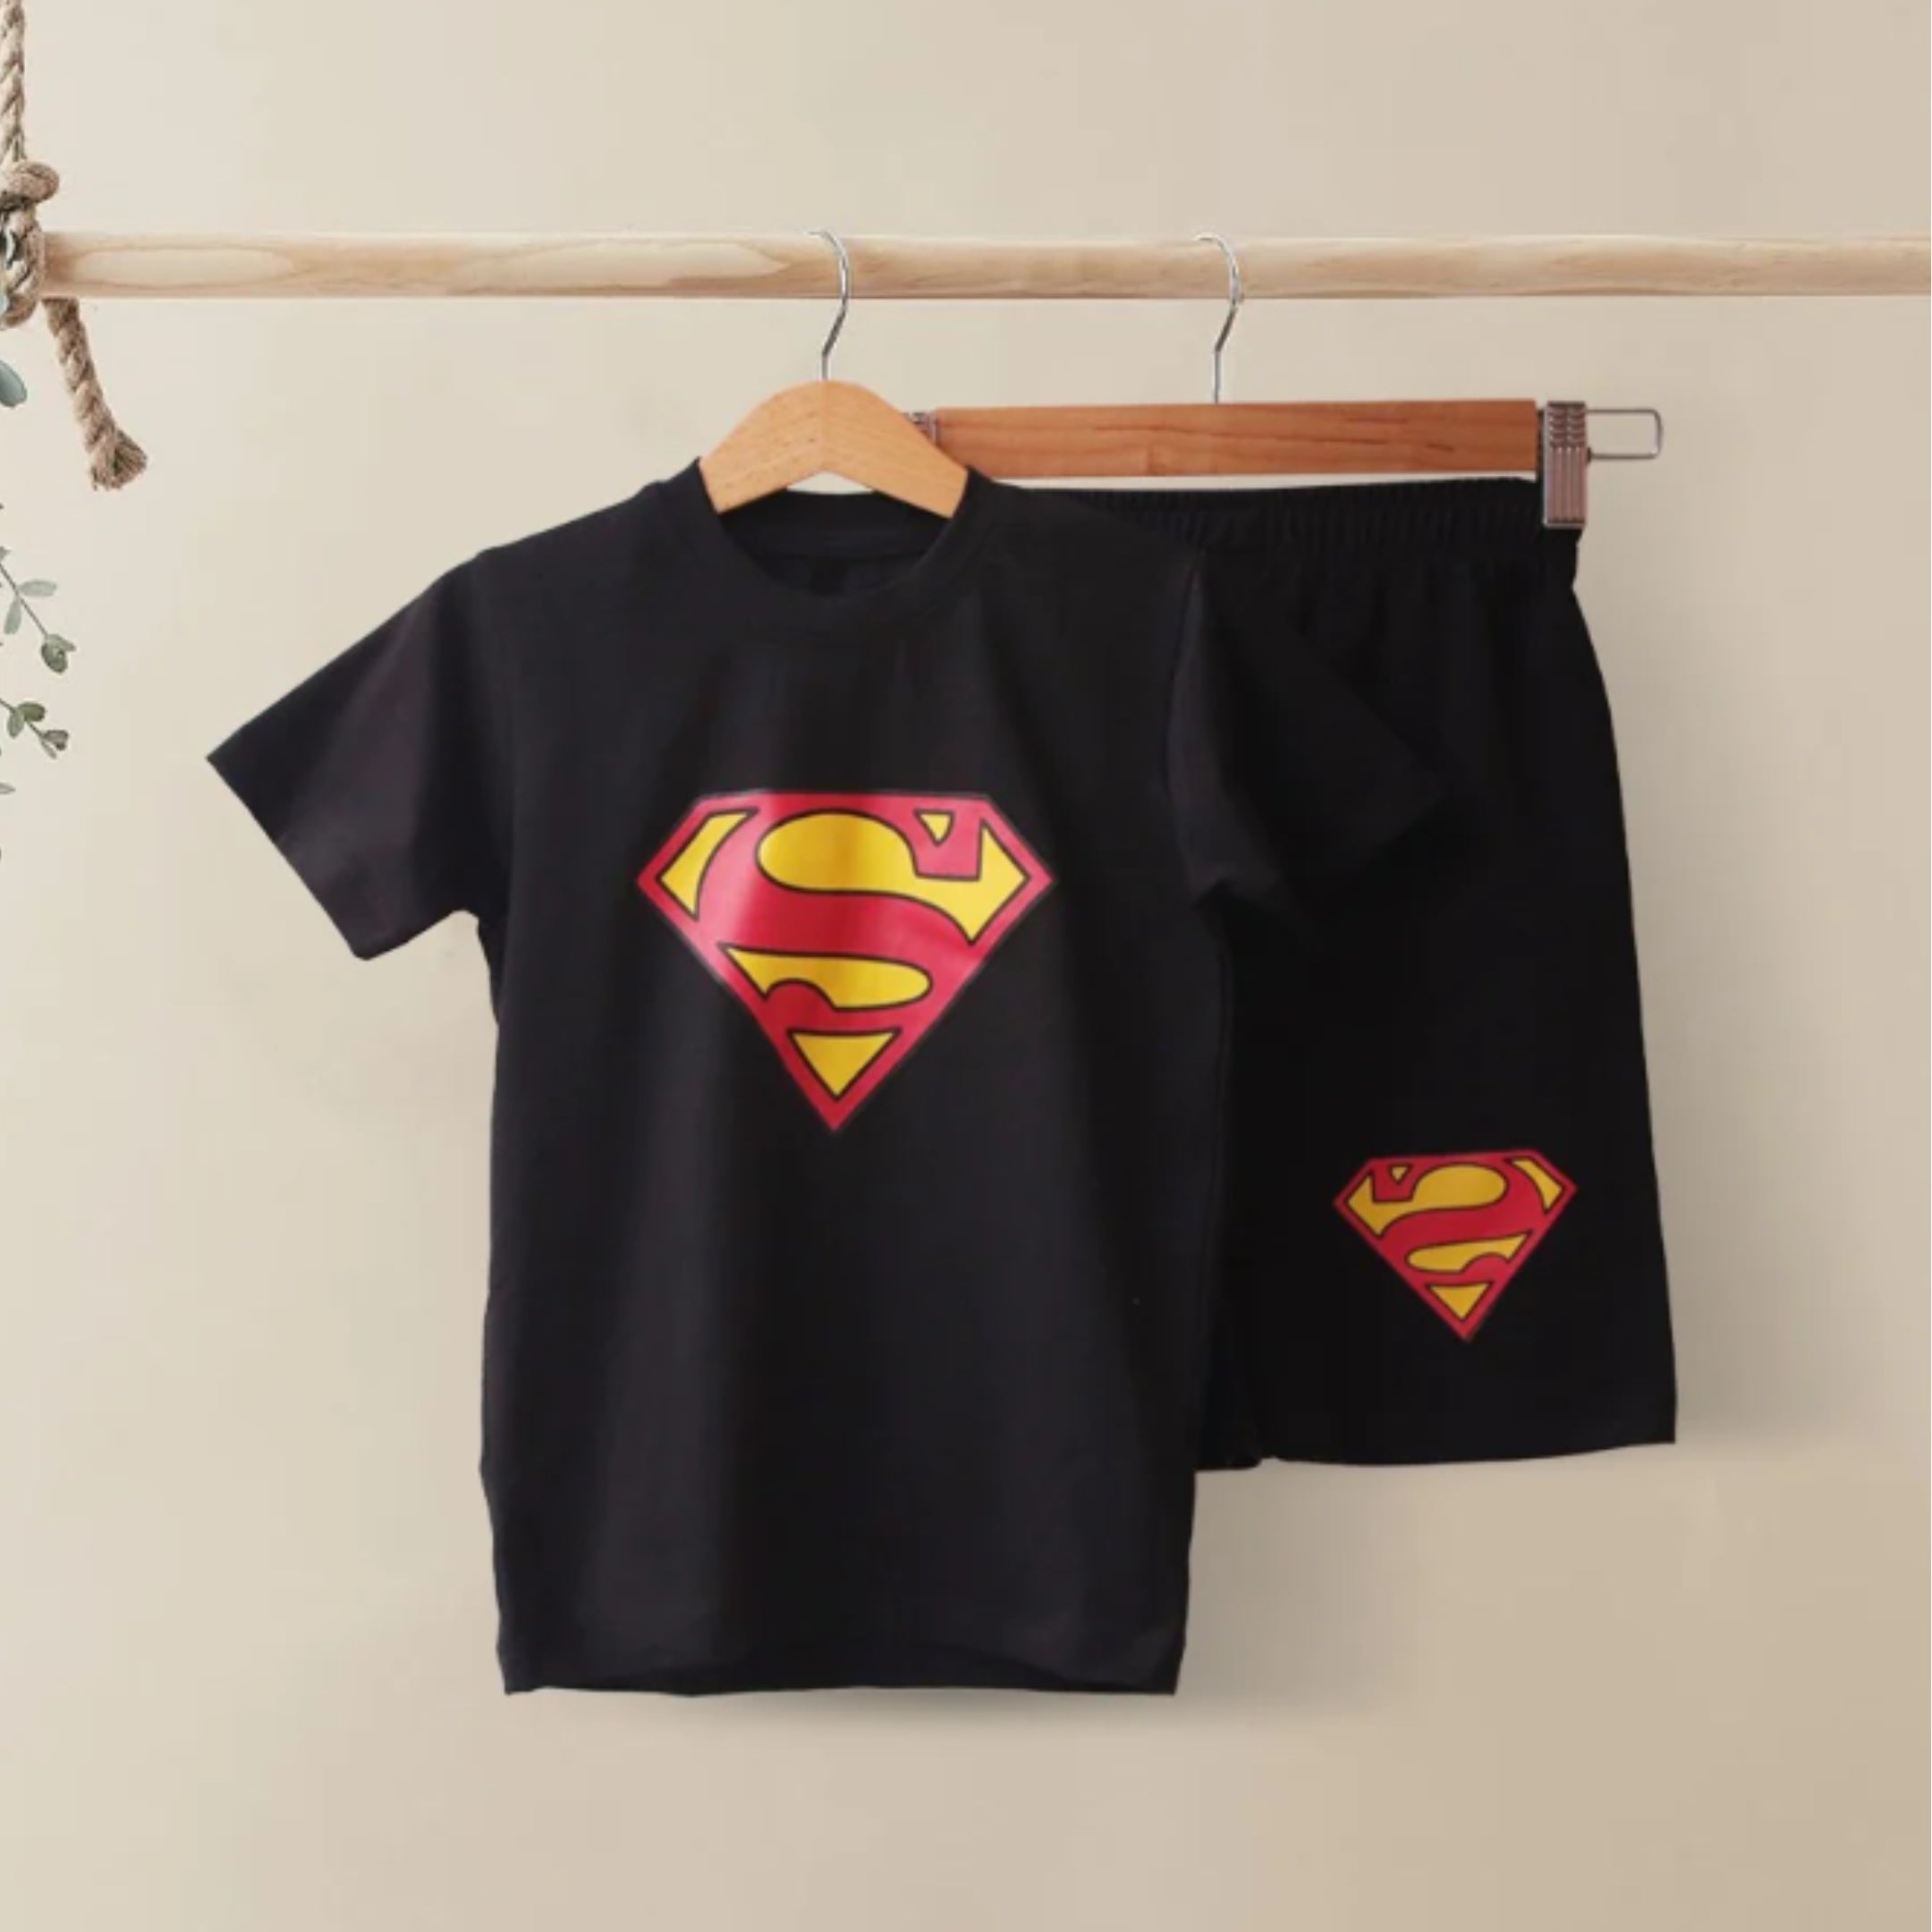 Superman Black T-Shirt And Shorts For Kids